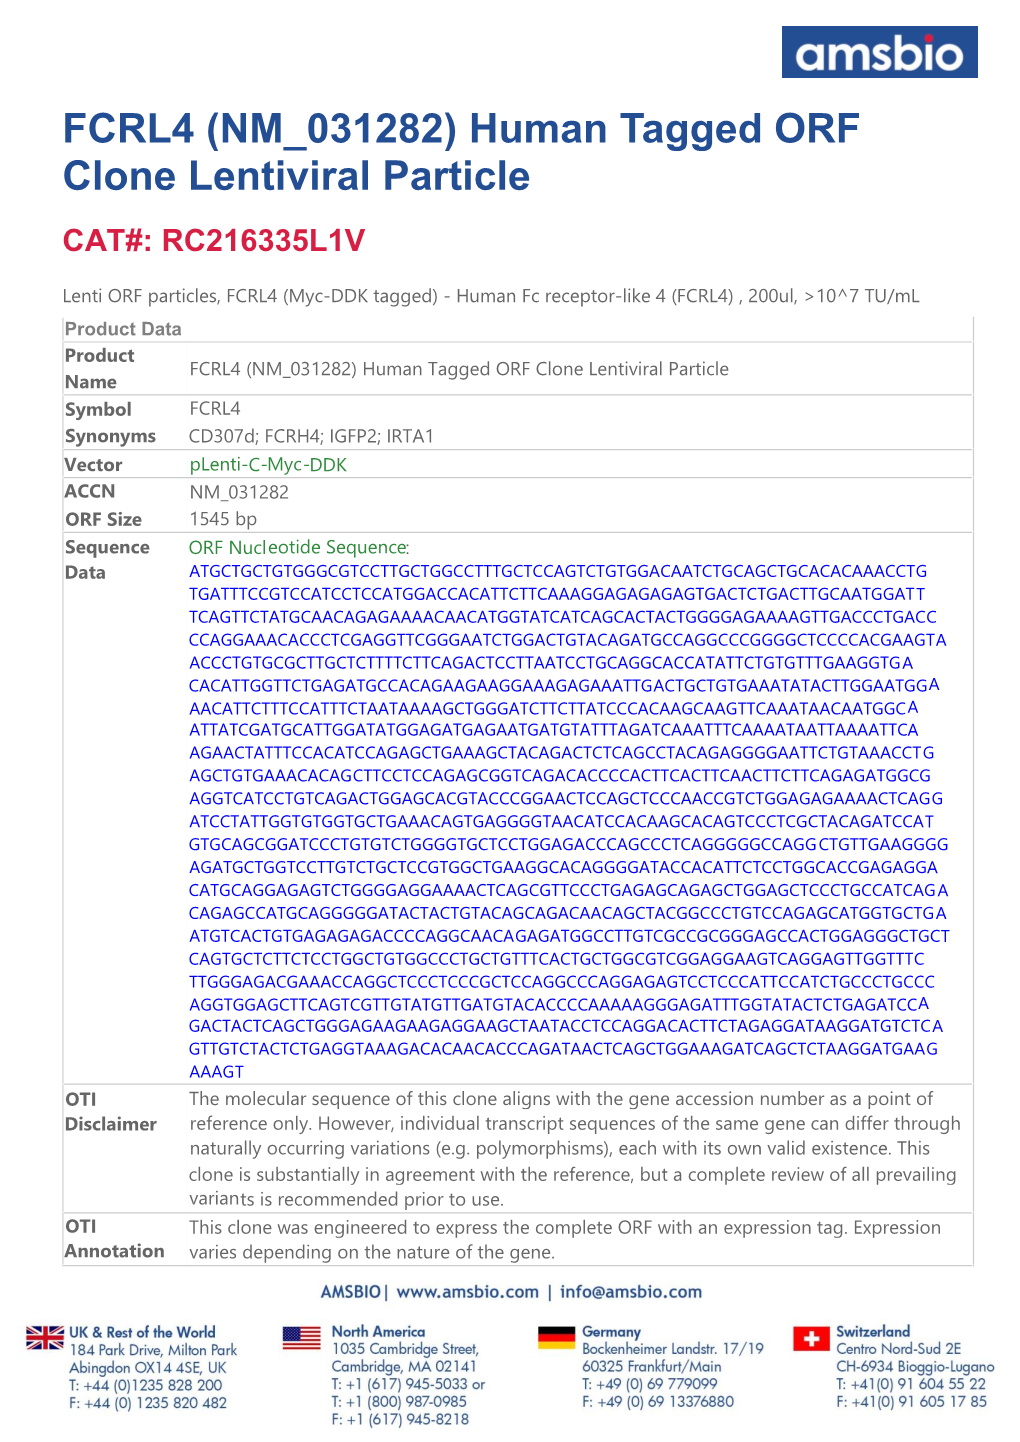 FCRL4 (NM 031282) Human Tagged ORF Clone Lentiviral Particle CAT#: RC216335L1V